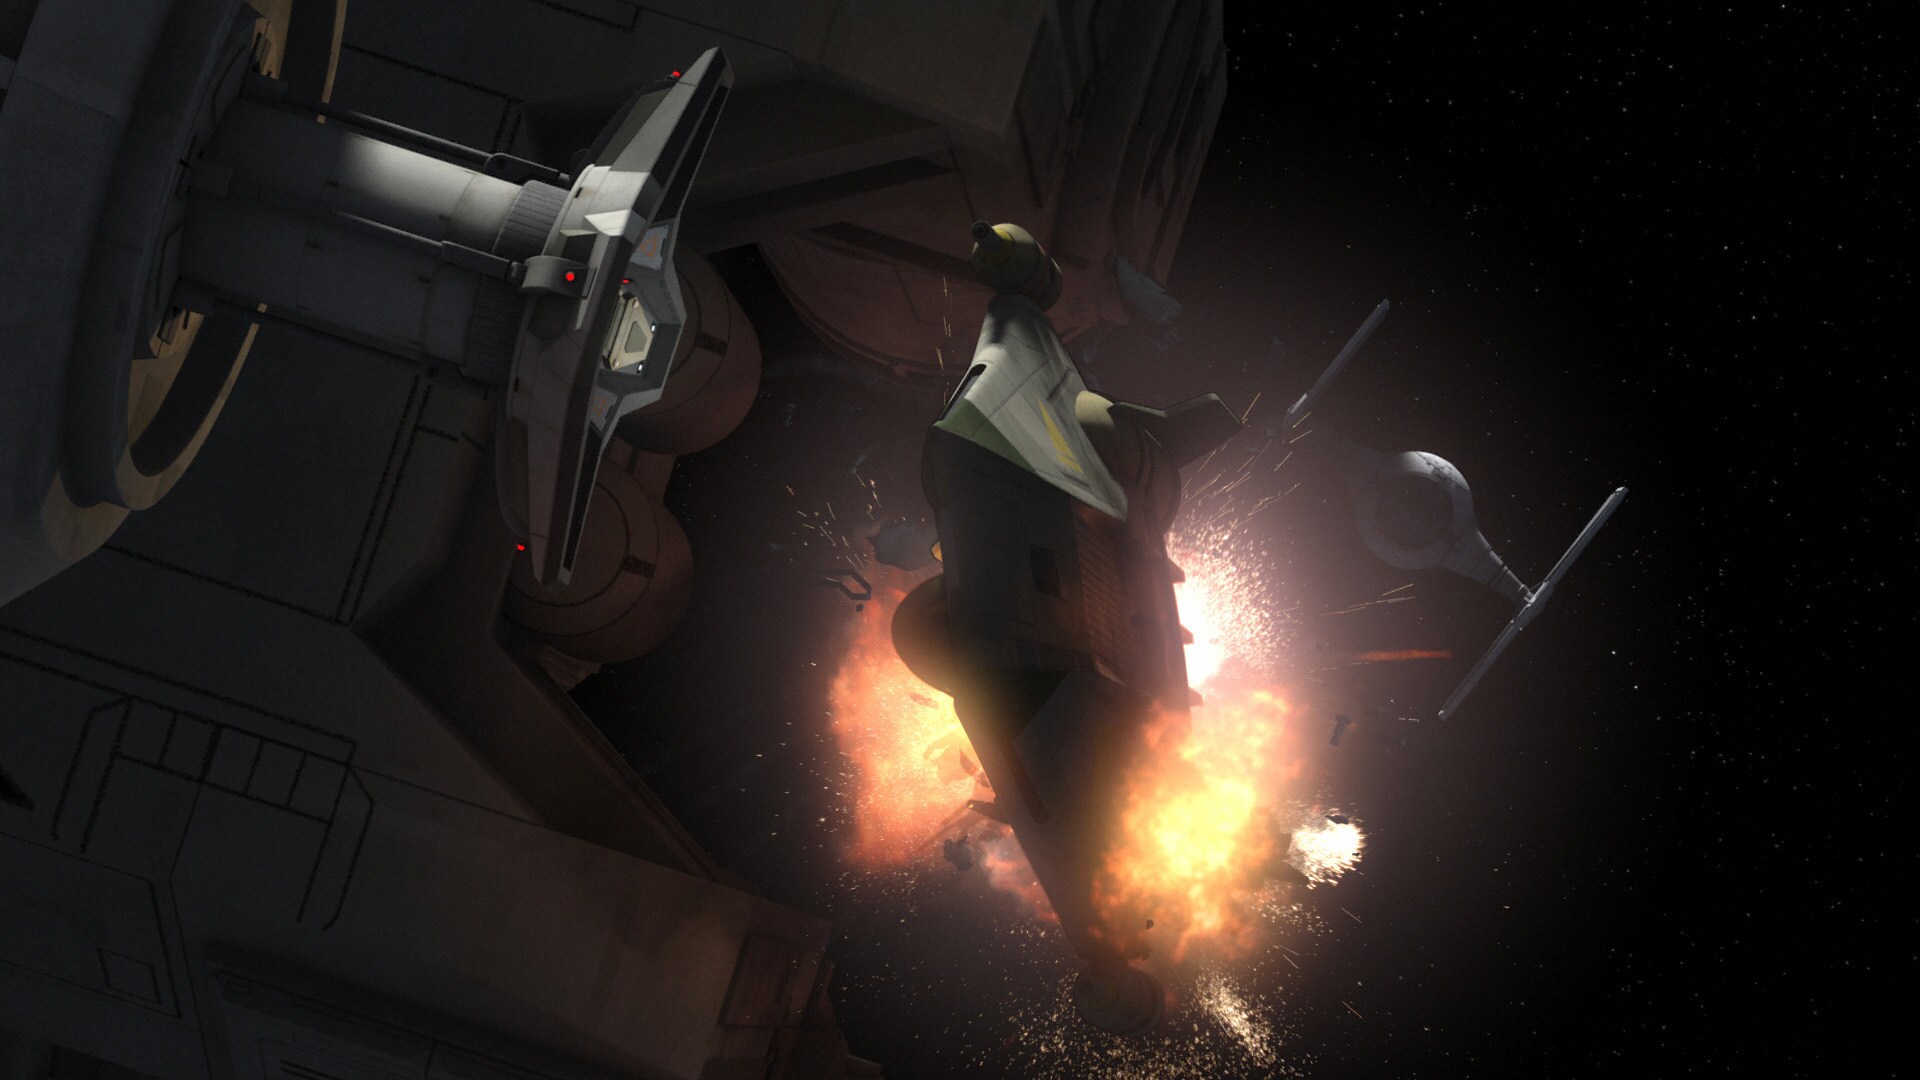 But not all rebel ships were so lucky. TIEs blast an A-wing before it can dock with the command s...